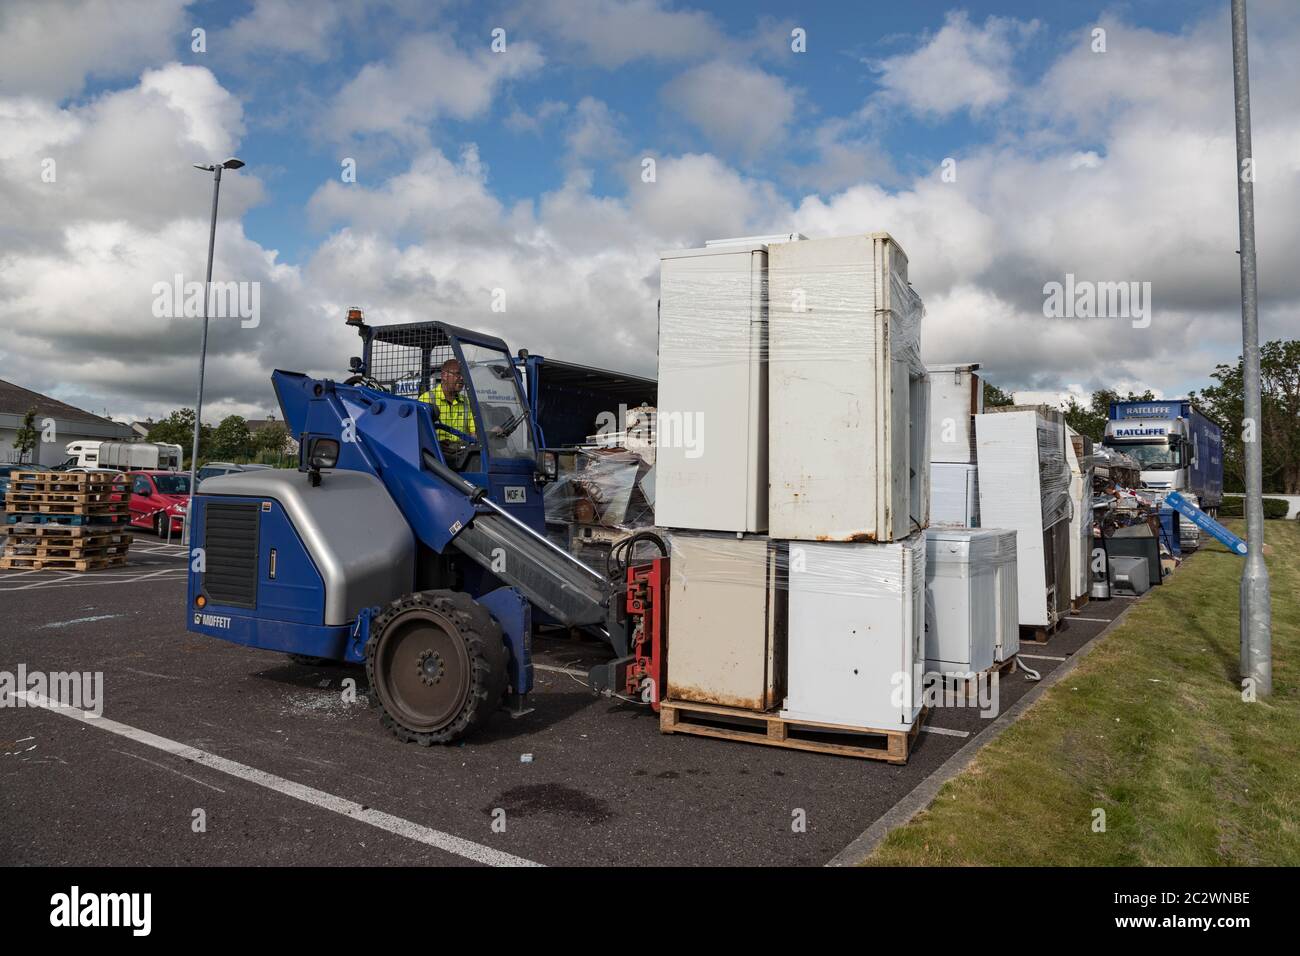 Listowel, Ireland - 19th July 2019: Electronics waste collection event for recycling in the town of Listowel, Republic of Ireland Stock Photo